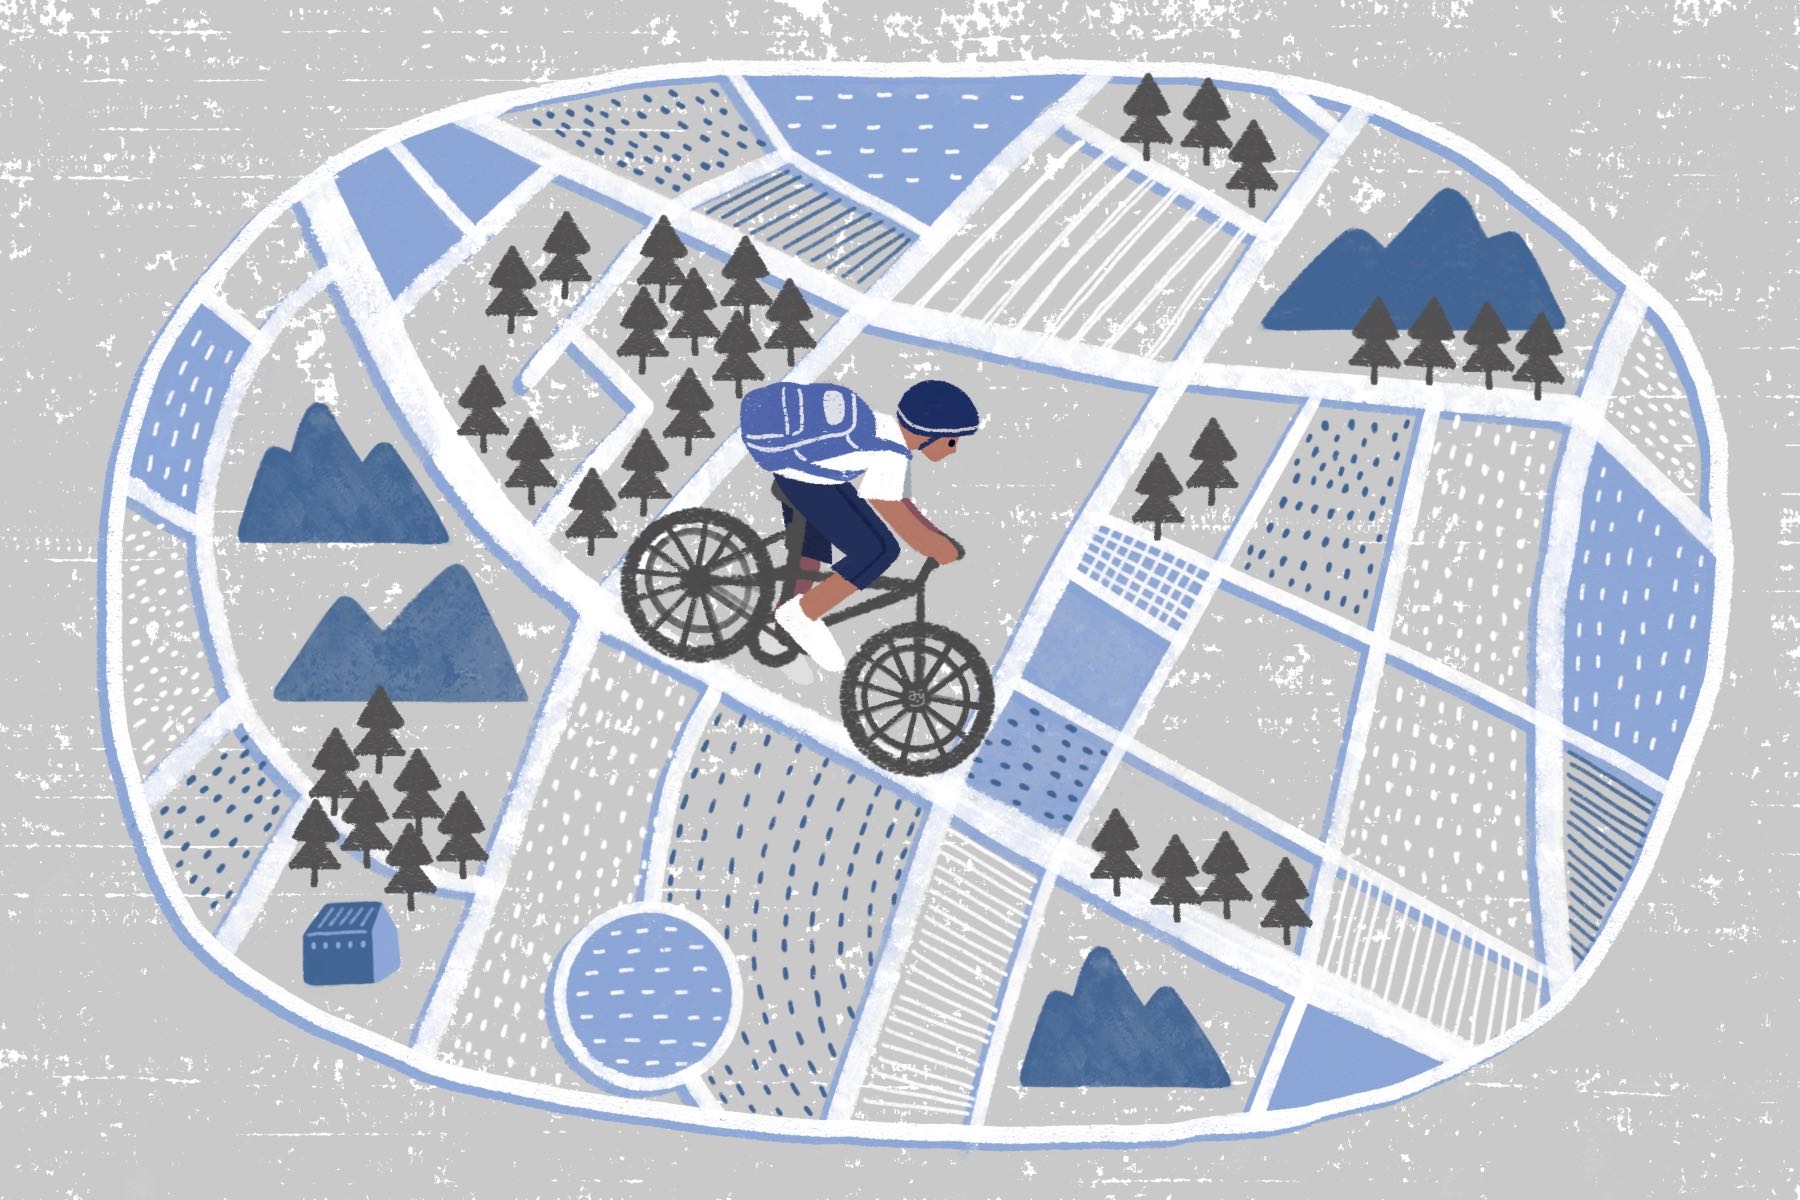 An illustration of a cyclist on the century ride